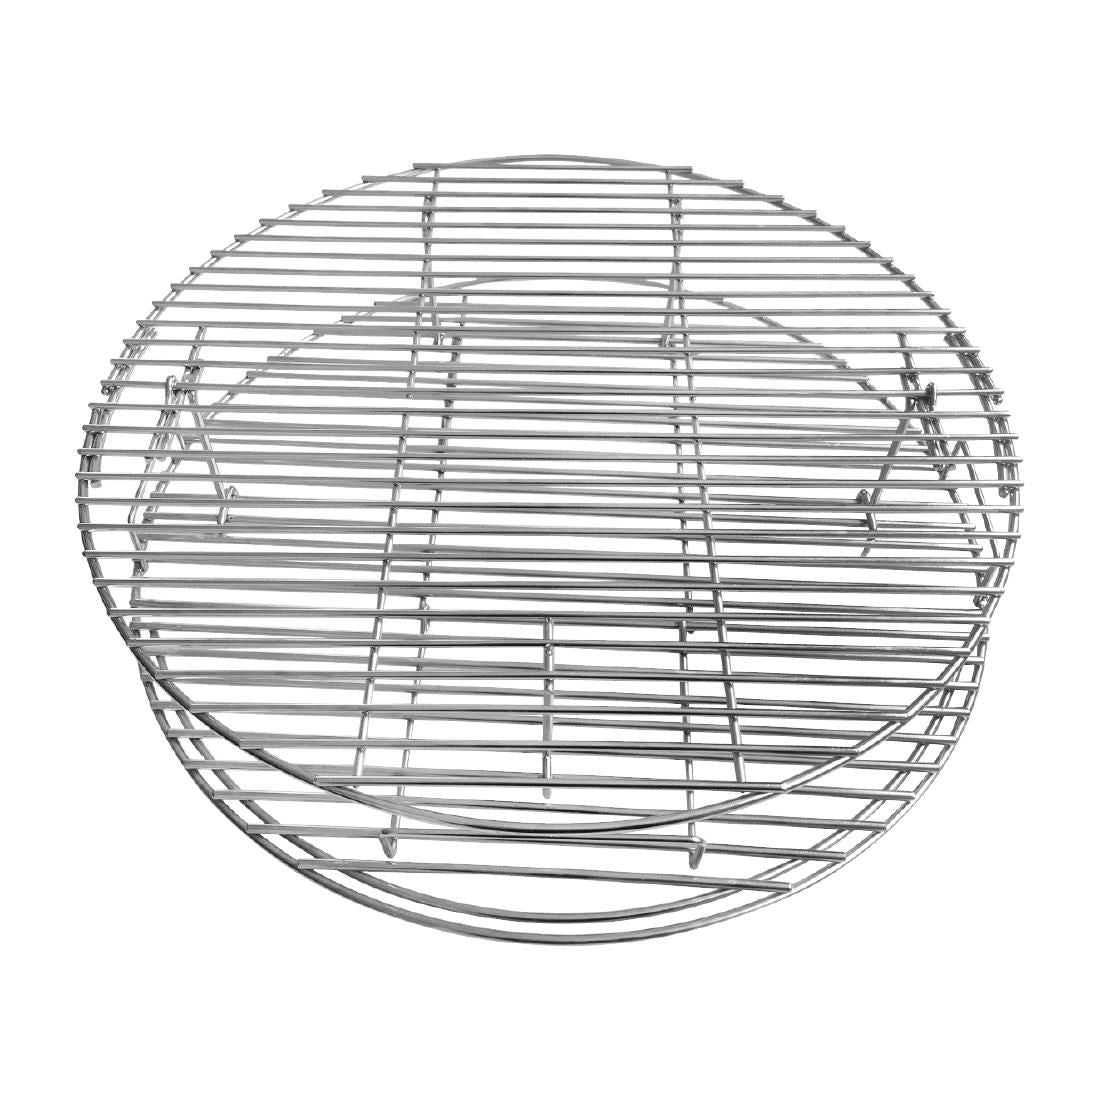 AJ378 Buffalo Cooking Grid JD Catering Equipment Solutions Ltd